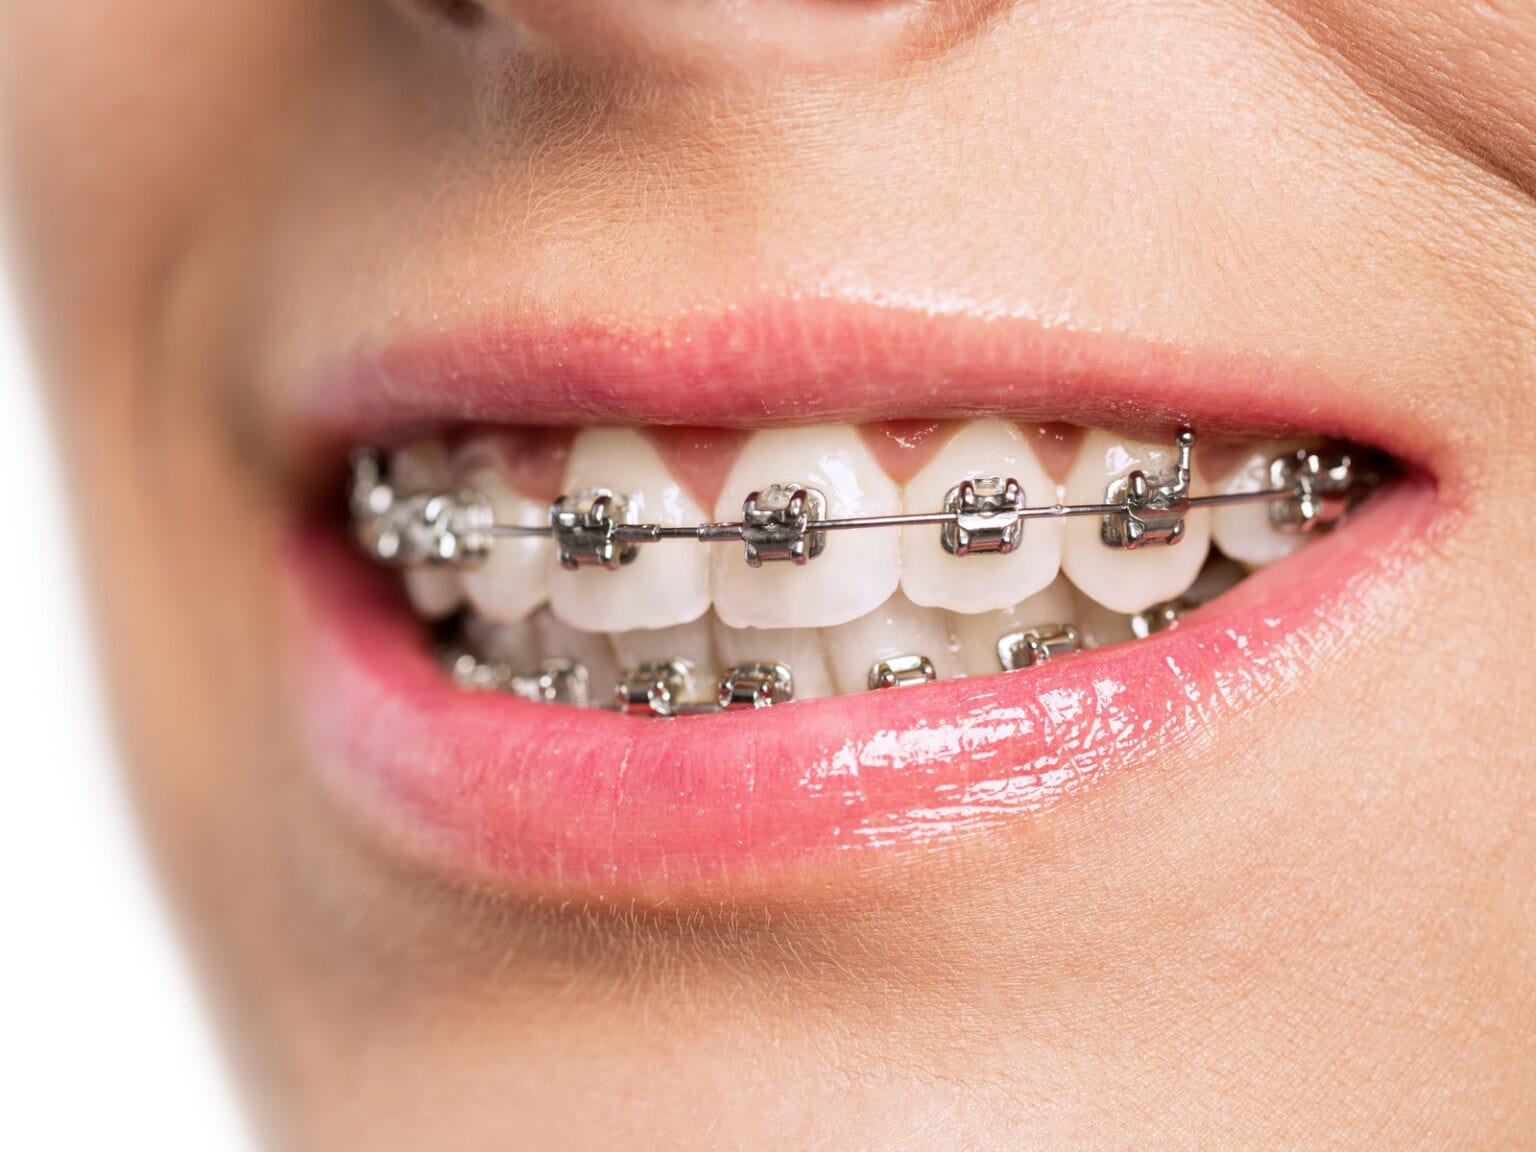 How to correct deep bite with braces?